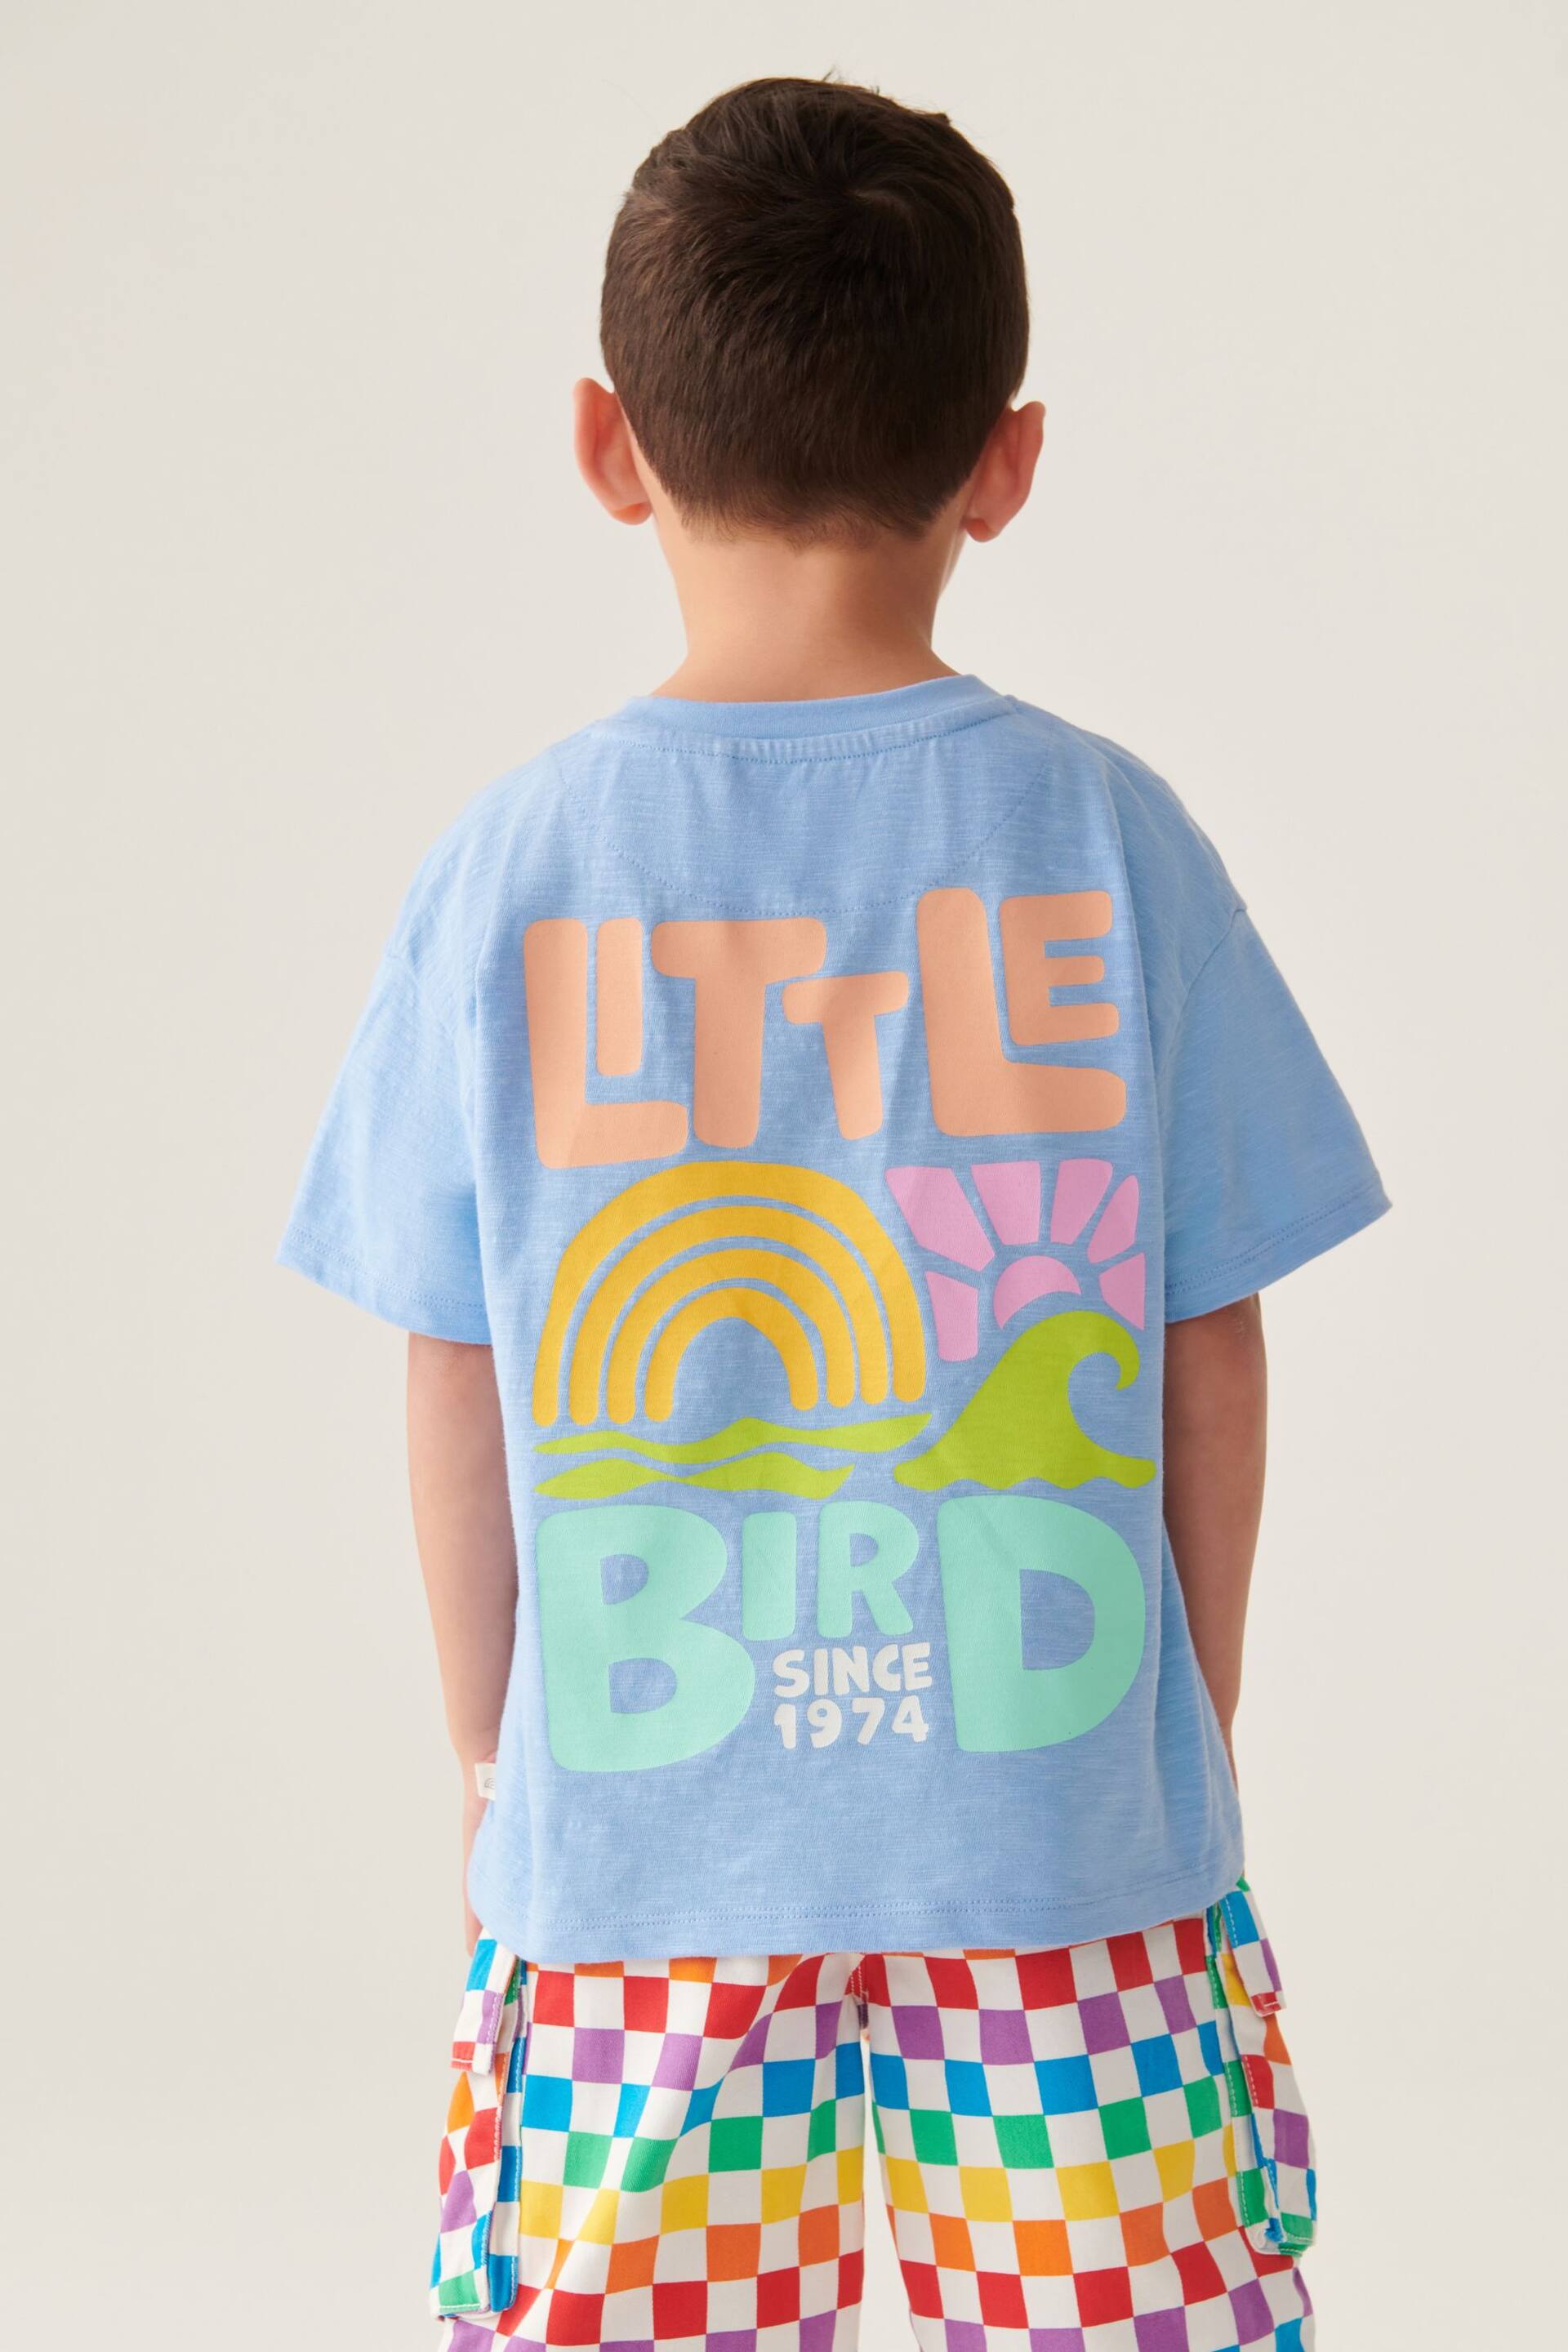 Little Bird by Jools Oliver Lilac Purple Short Sleeve Colourful Relaxed Fit T-Shirt - Image 1 of 3